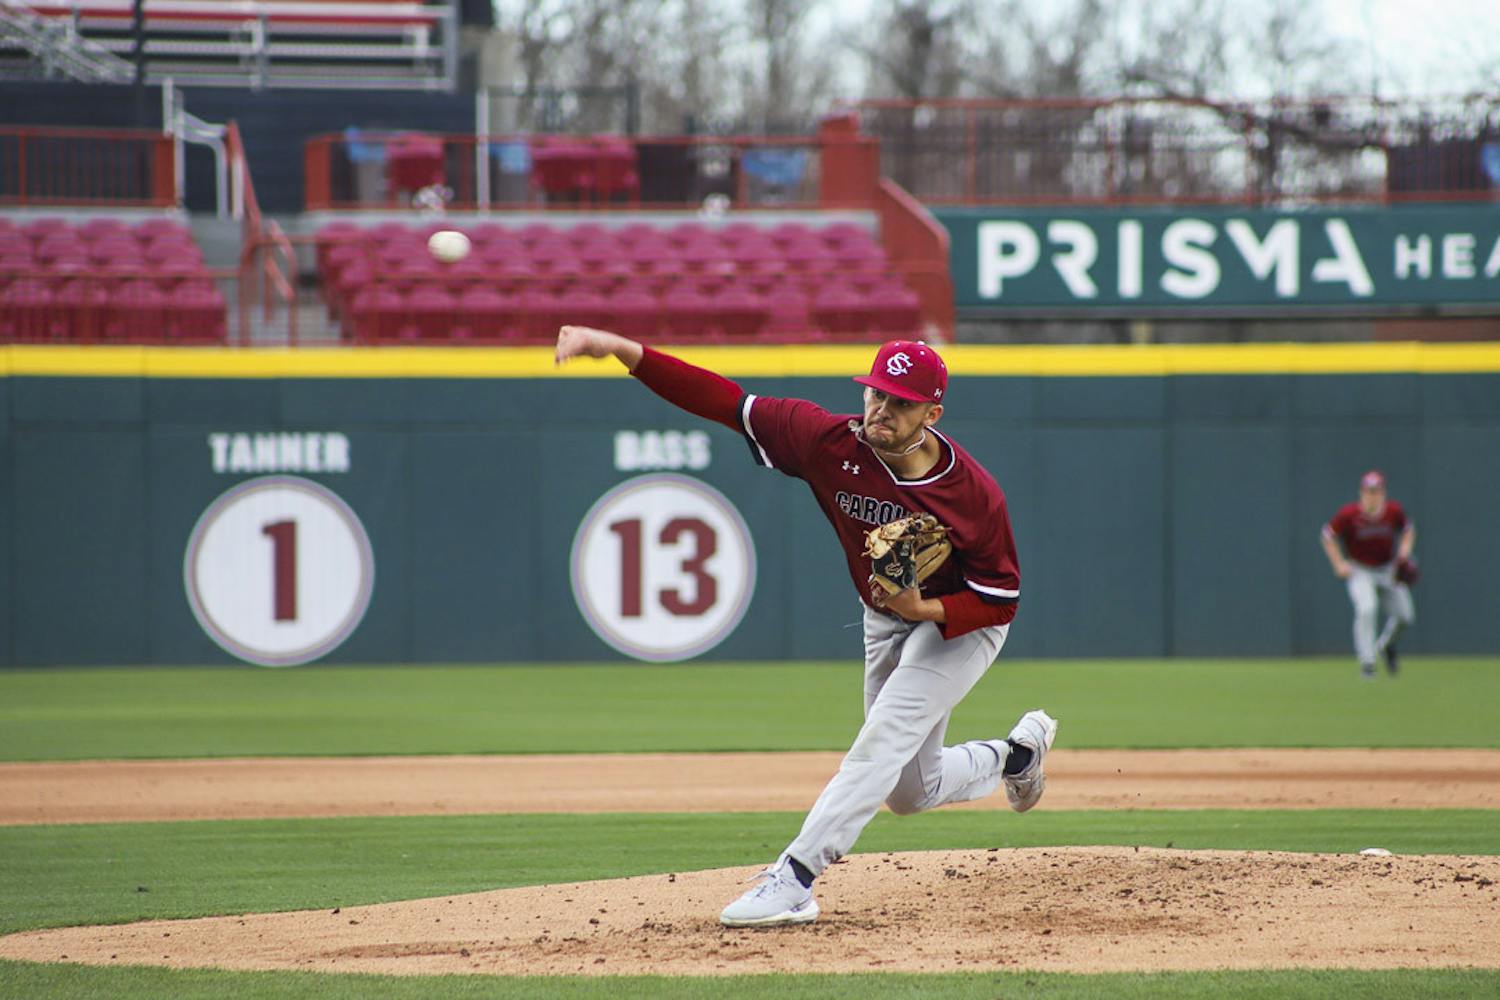 Senior pitcher Noah Hall pitches for team Garnet in the first scrimmage of the season on Jan. 23, 2023. Hall is returning to play for South Carolina after making the 20th-round pick by the Milwaukee Brewers in July 2022.